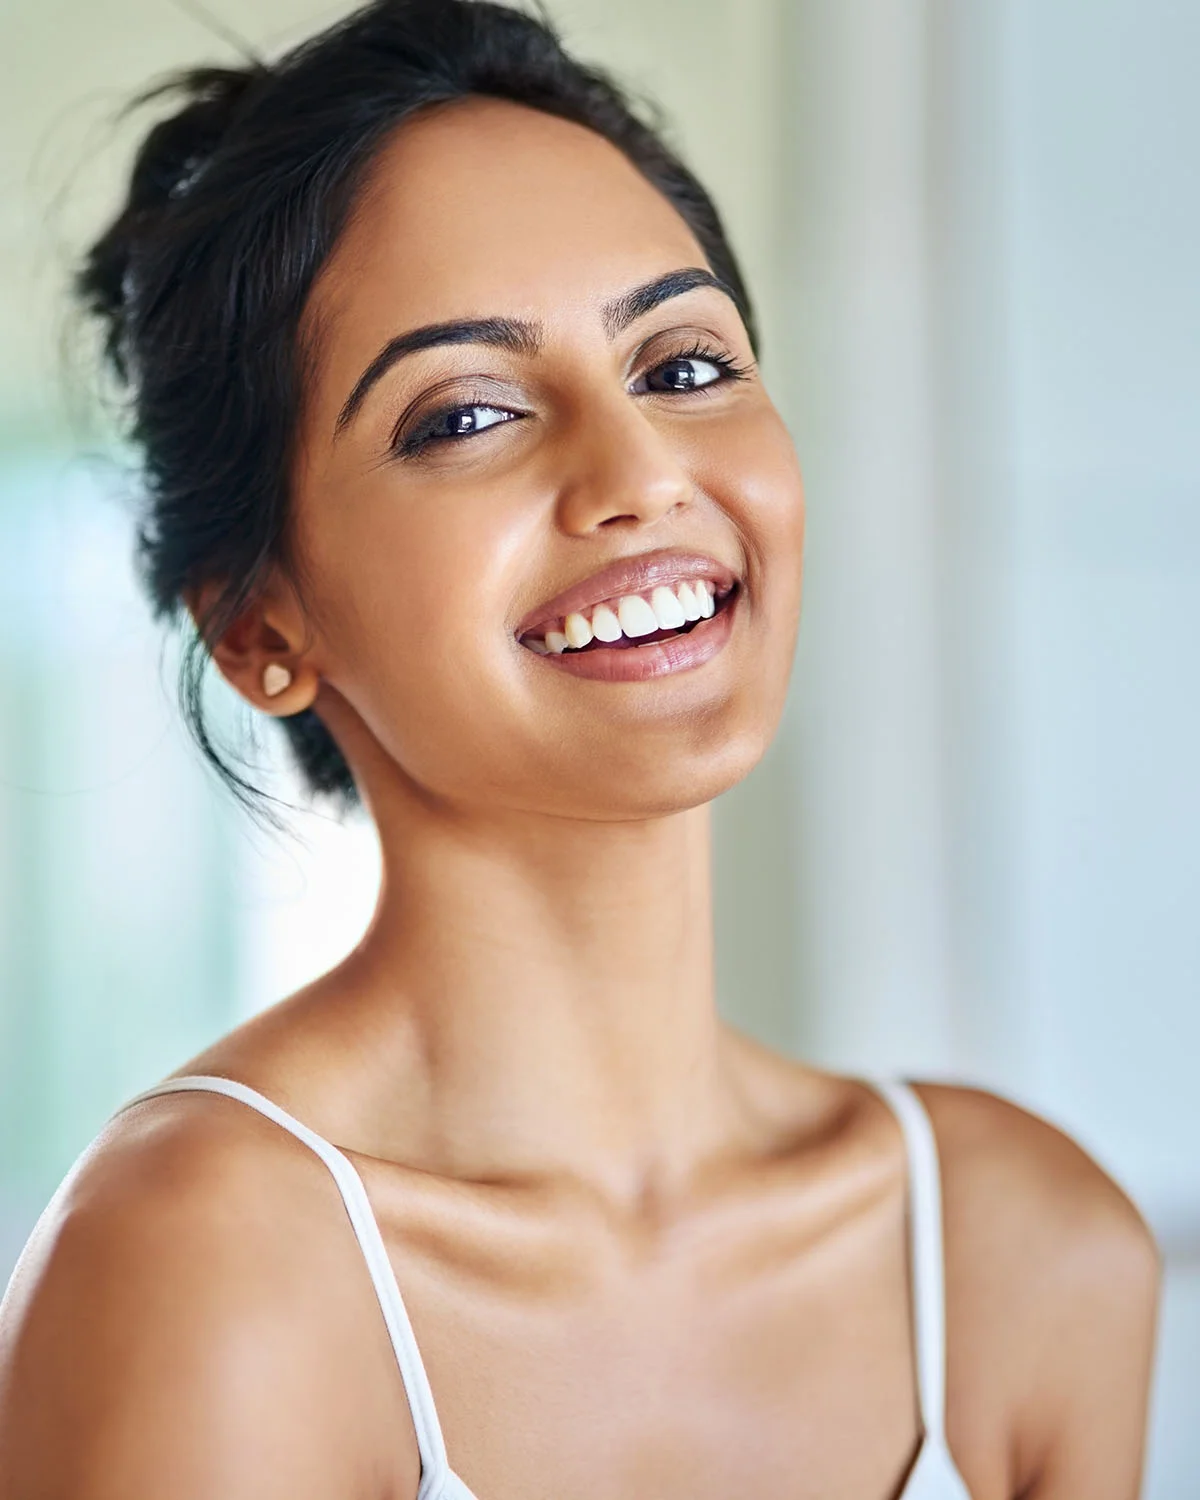 East Indian woman smiling